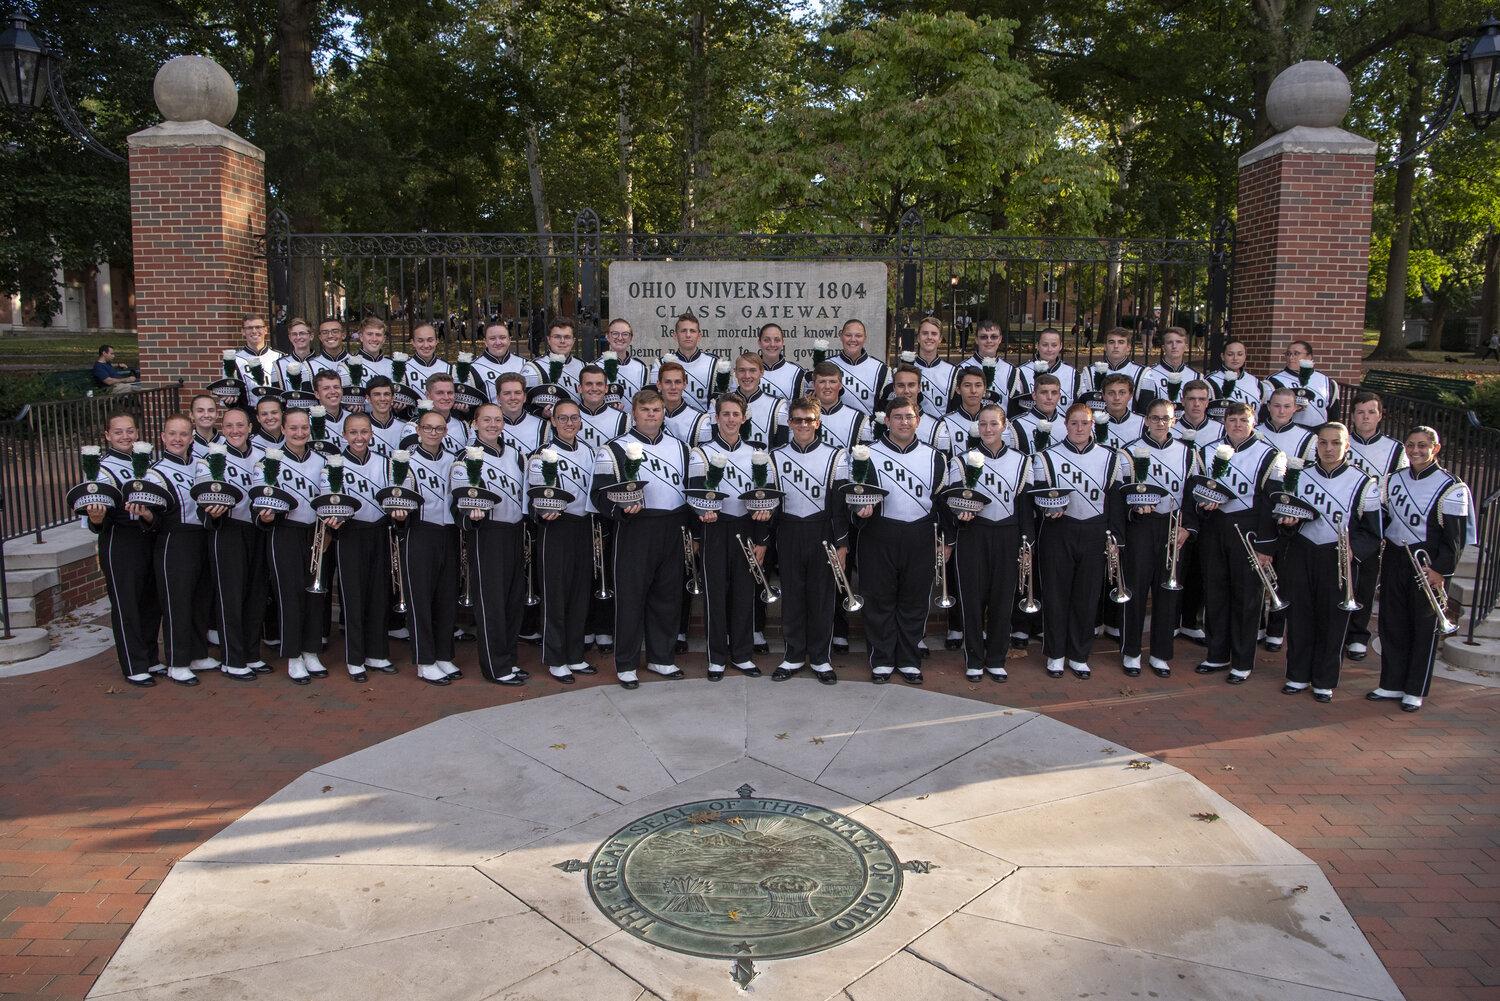 Marching 110 trumpet players